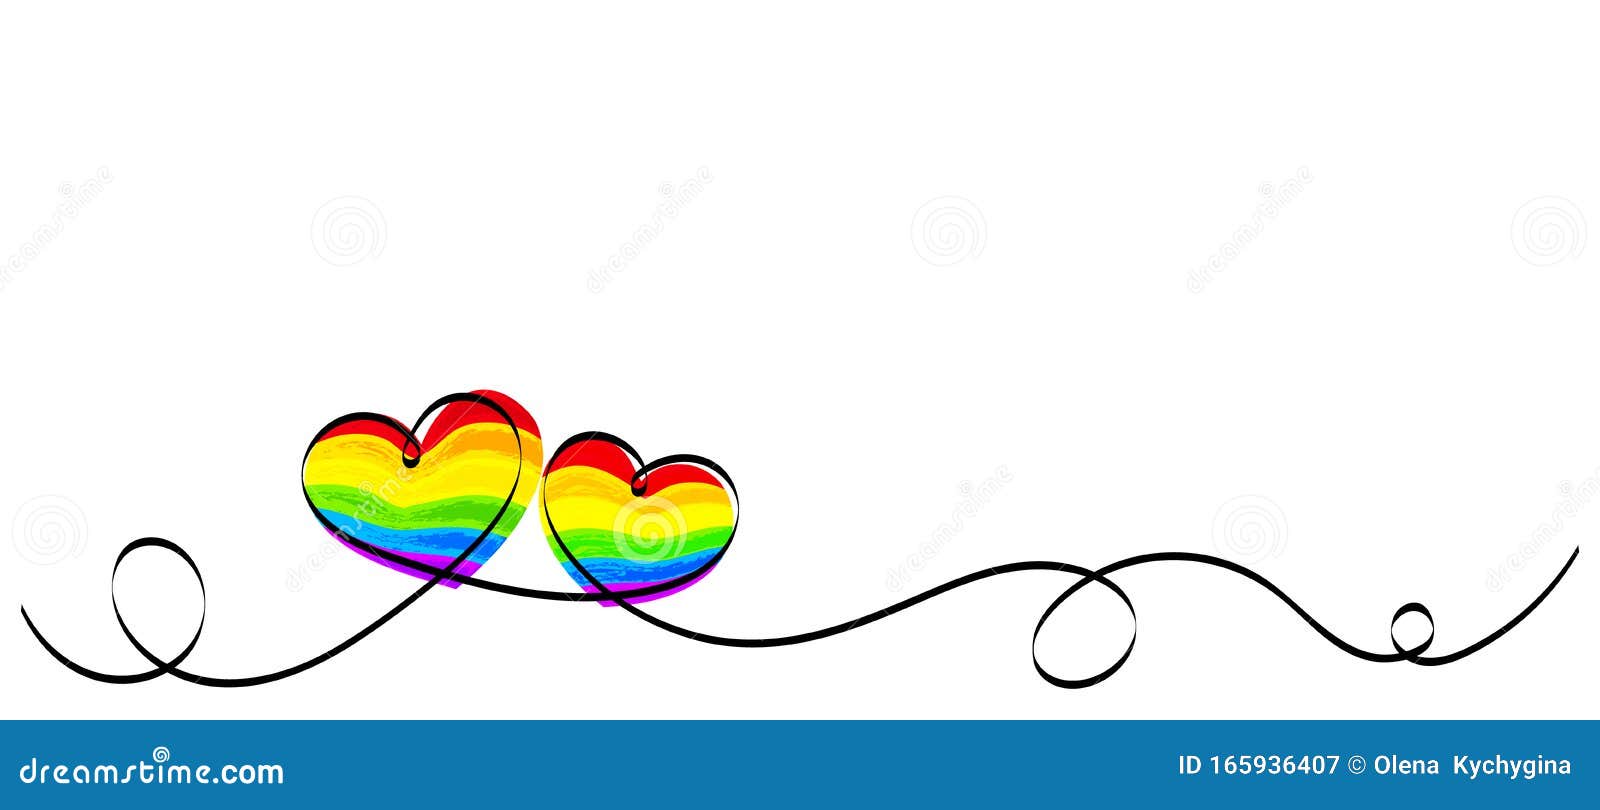 calligraphy rainbow heart ribbon on white background. lgbt pride month. lesbian, gay, bisexual, transgender love s.